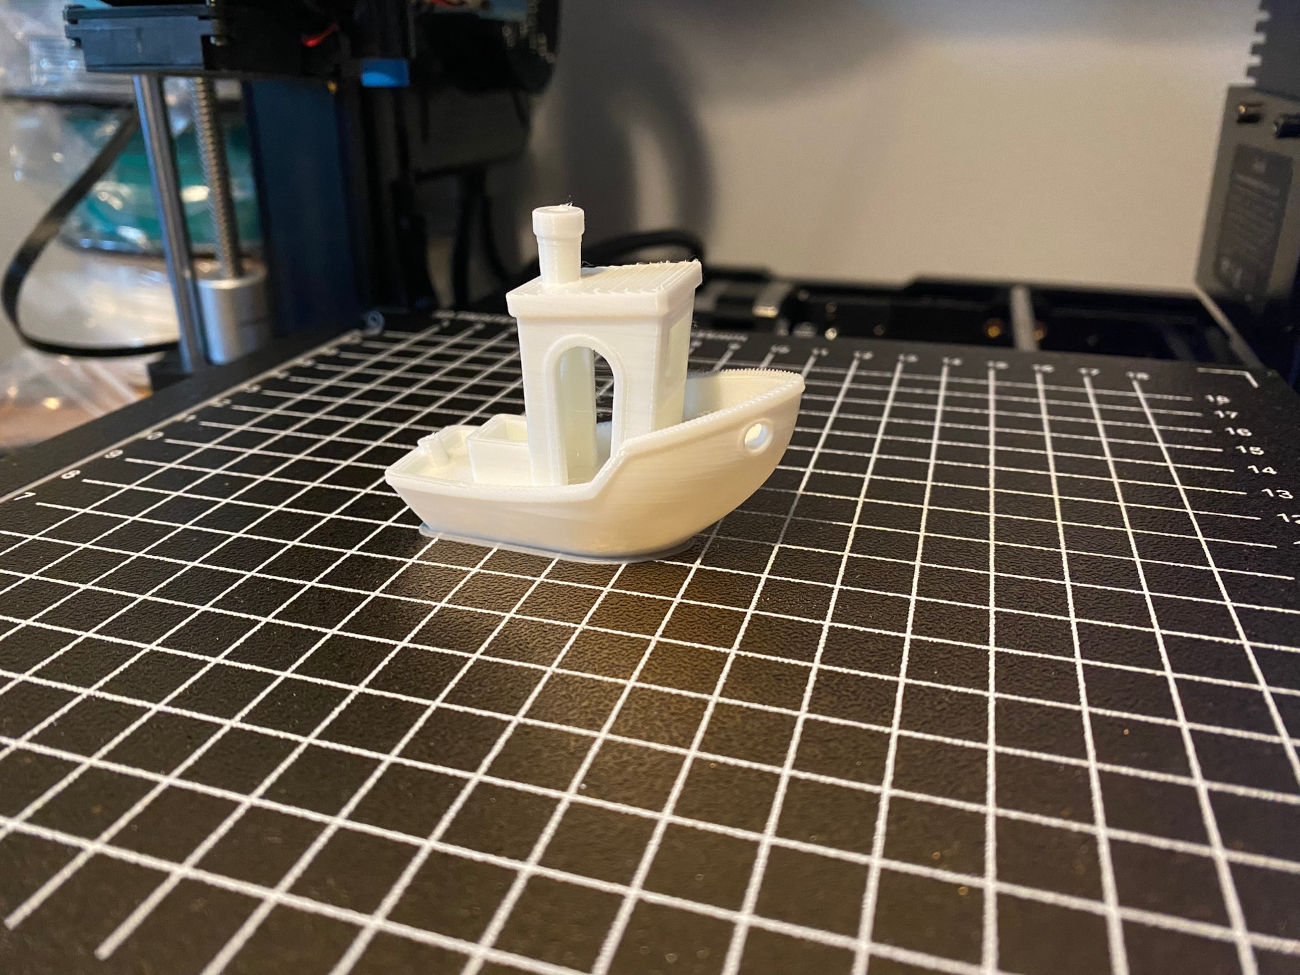 A white 'Benchy' sat on the 3D printer bed